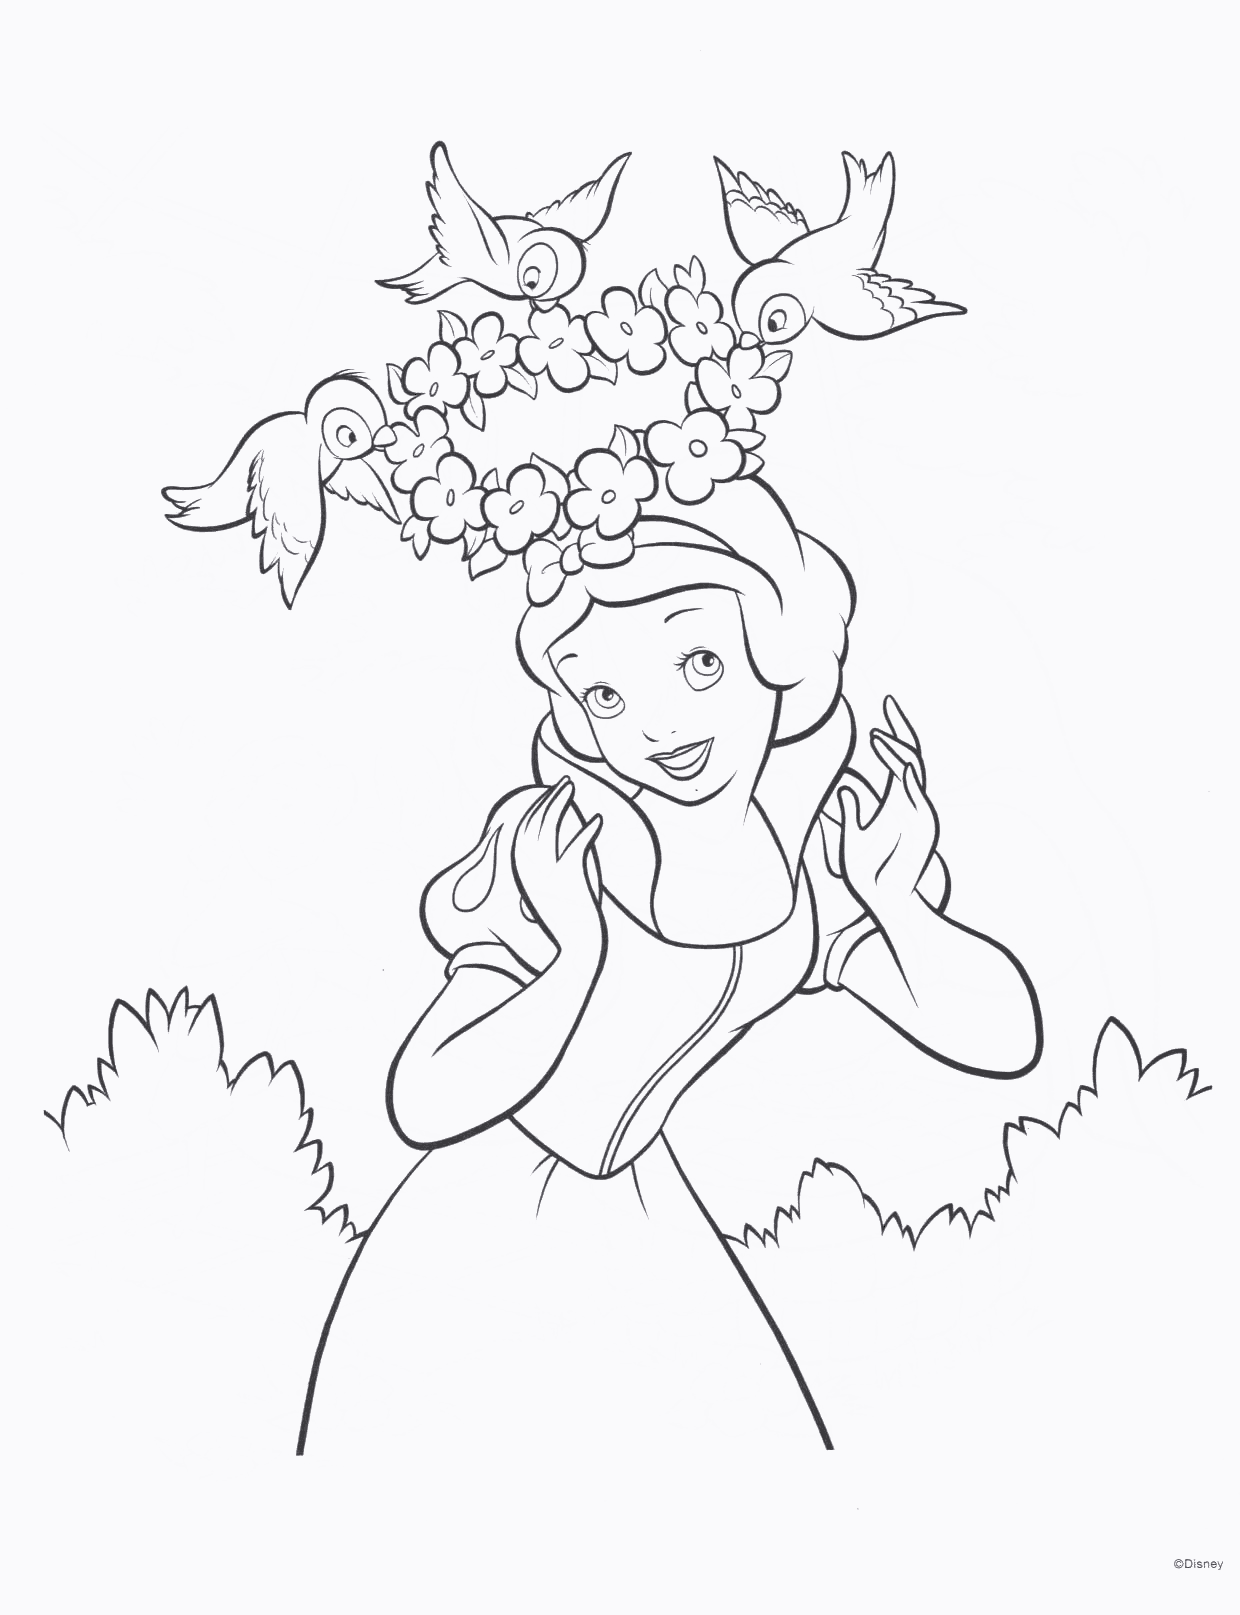 Free Printable Disney Princess Coloring Pages For Kids Coloring Wallpapers Download Free Images Wallpaper [coloring654.blogspot.com]